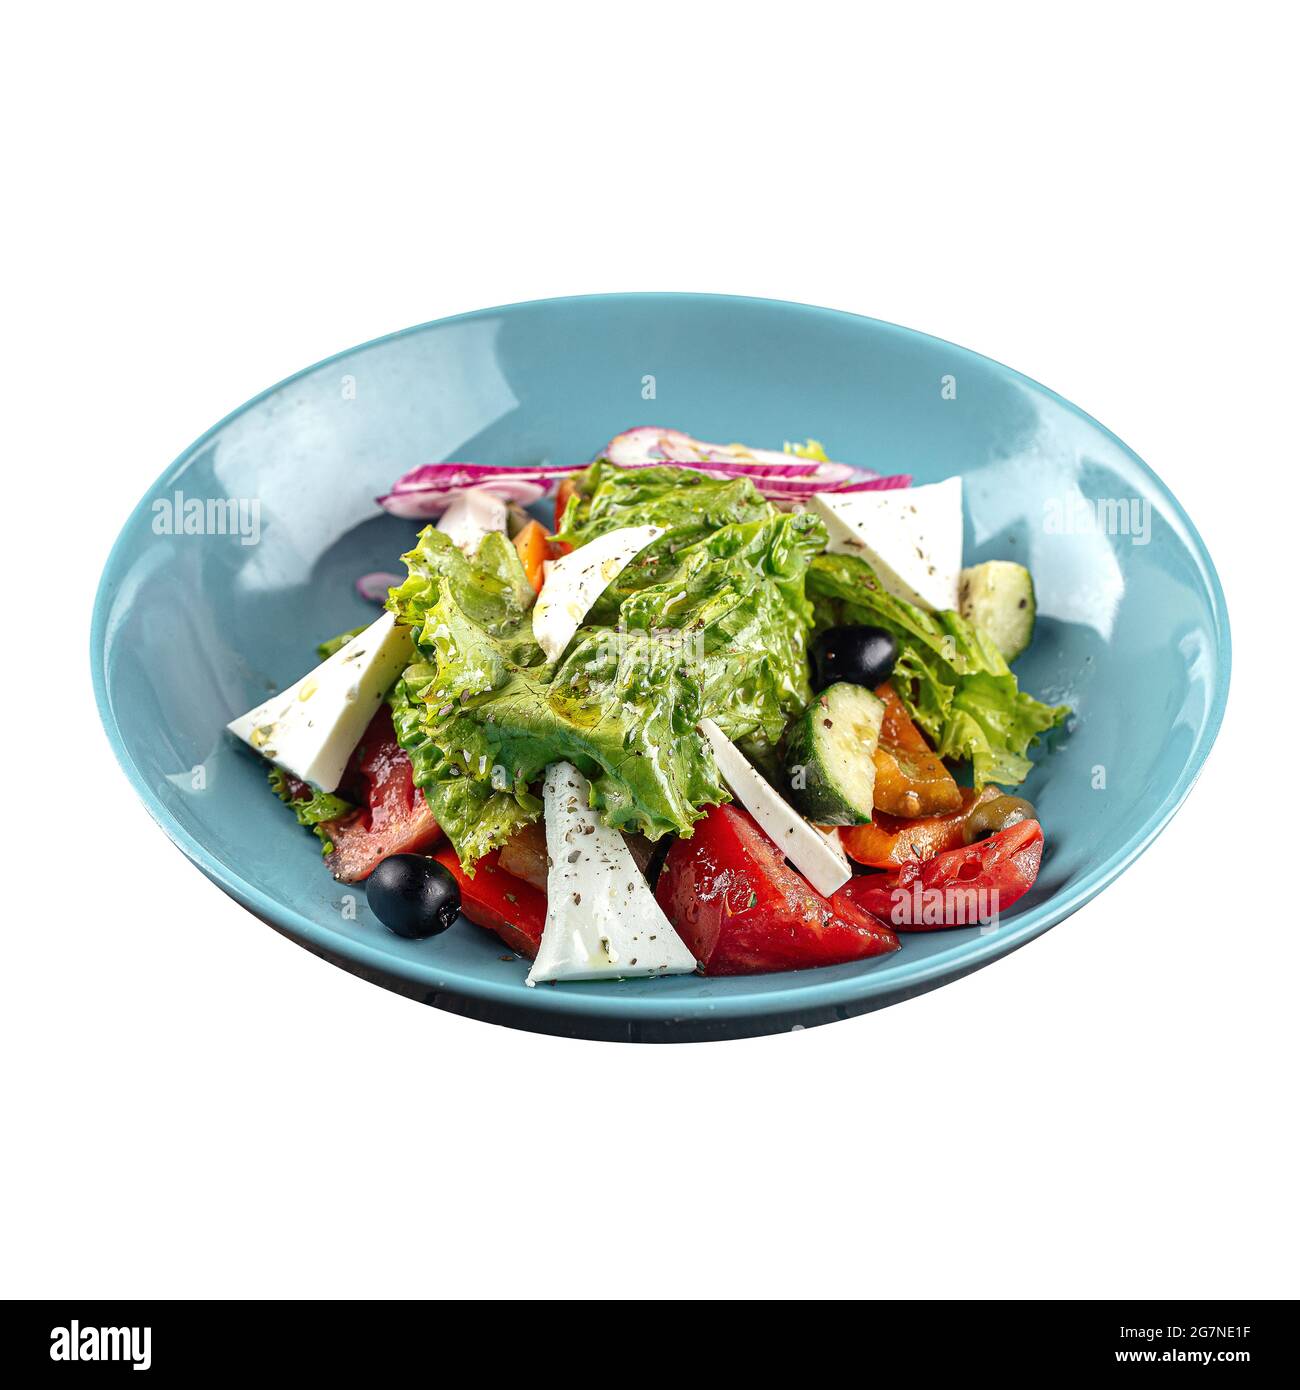 Isolated plate of greek salad with fresh vegetables Stock Photo